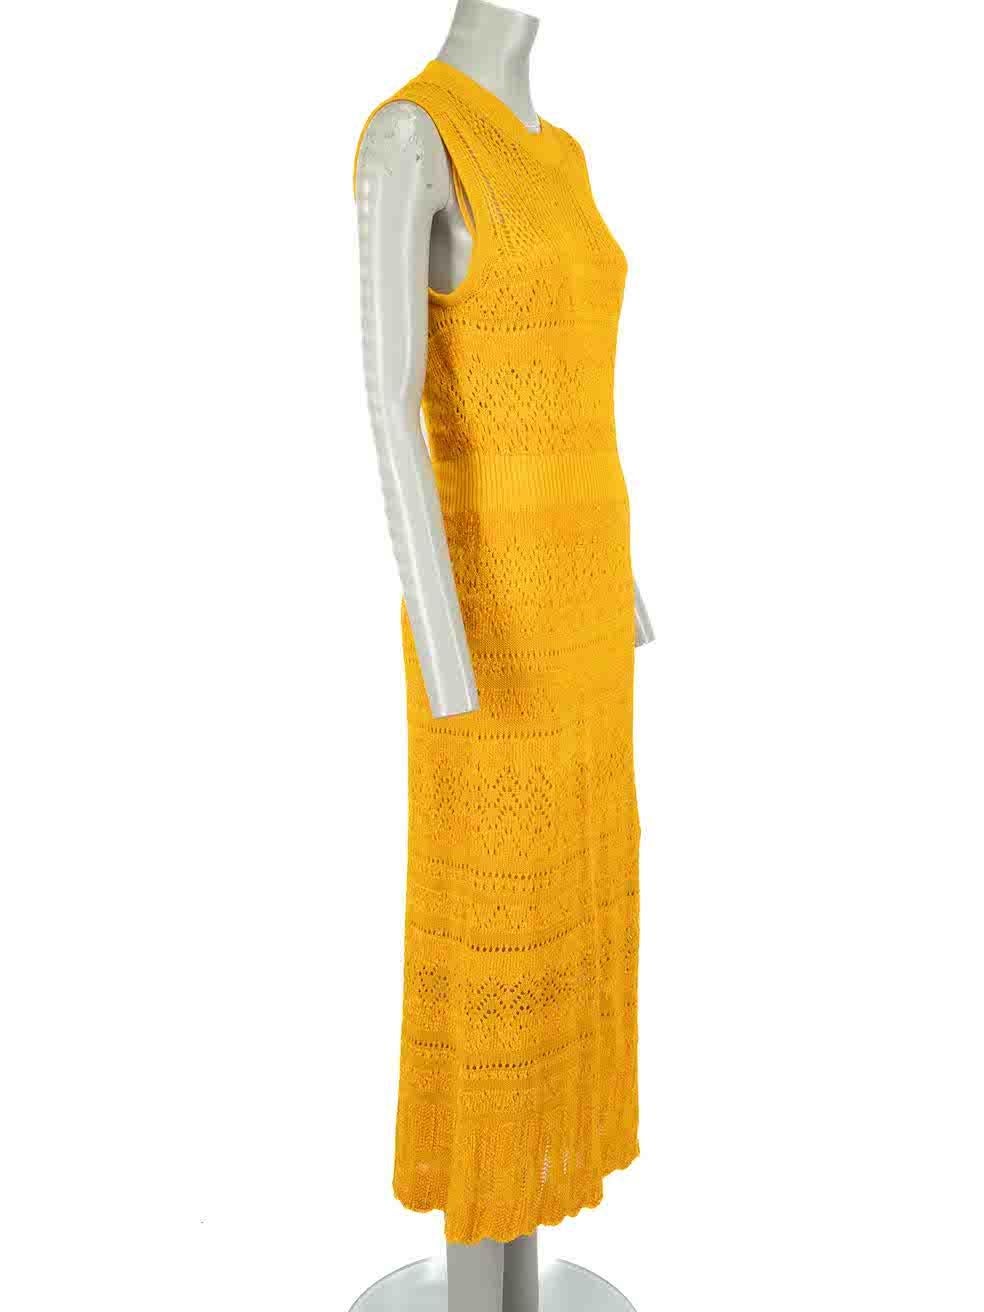 CONDITION is Very good. Minimal wear to dress is evident. Minimal loose thread to front left side of dress on this used McQ designer resale item.
 
Details
Mustard yellow
Wool
Knit dress
Sleeveless
Round neck
Midi
Slip under dress included
 
Made in